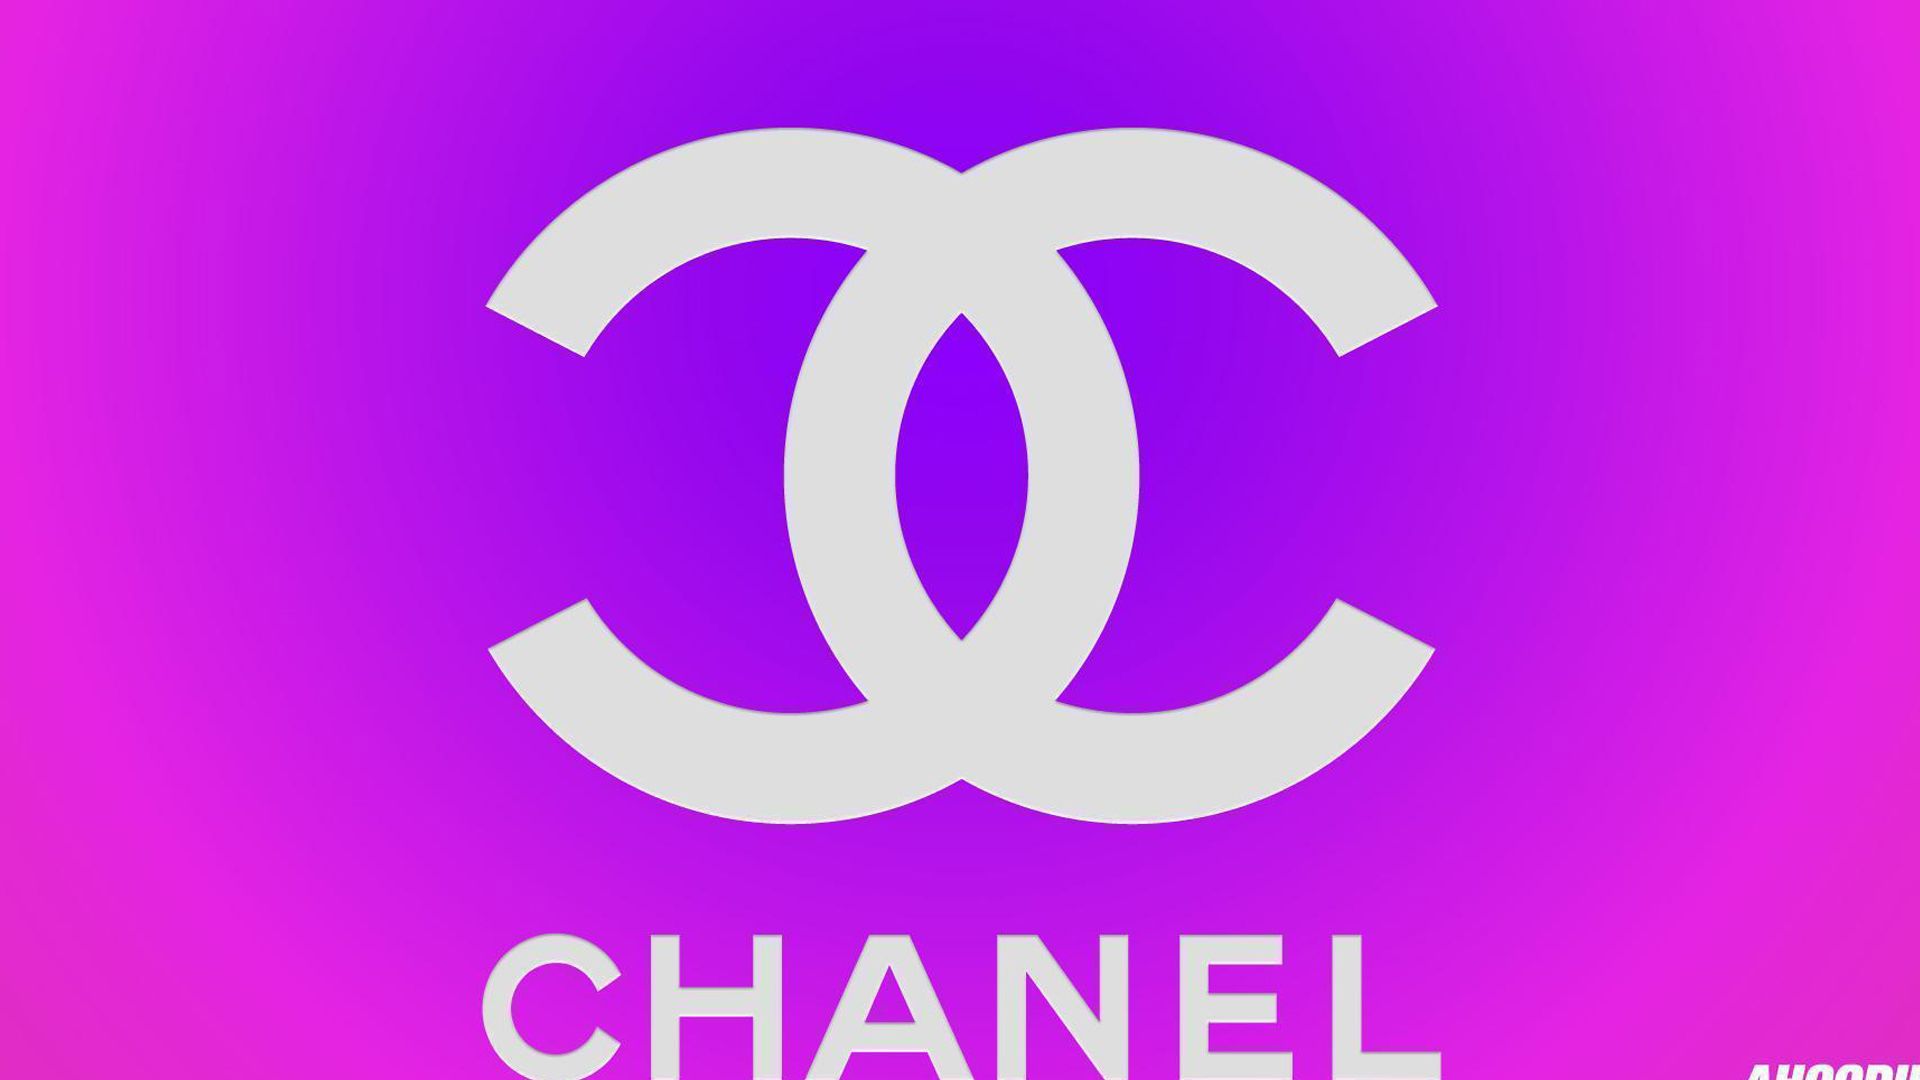 chanel logo in pink and purple background HD chanel Wallpaper